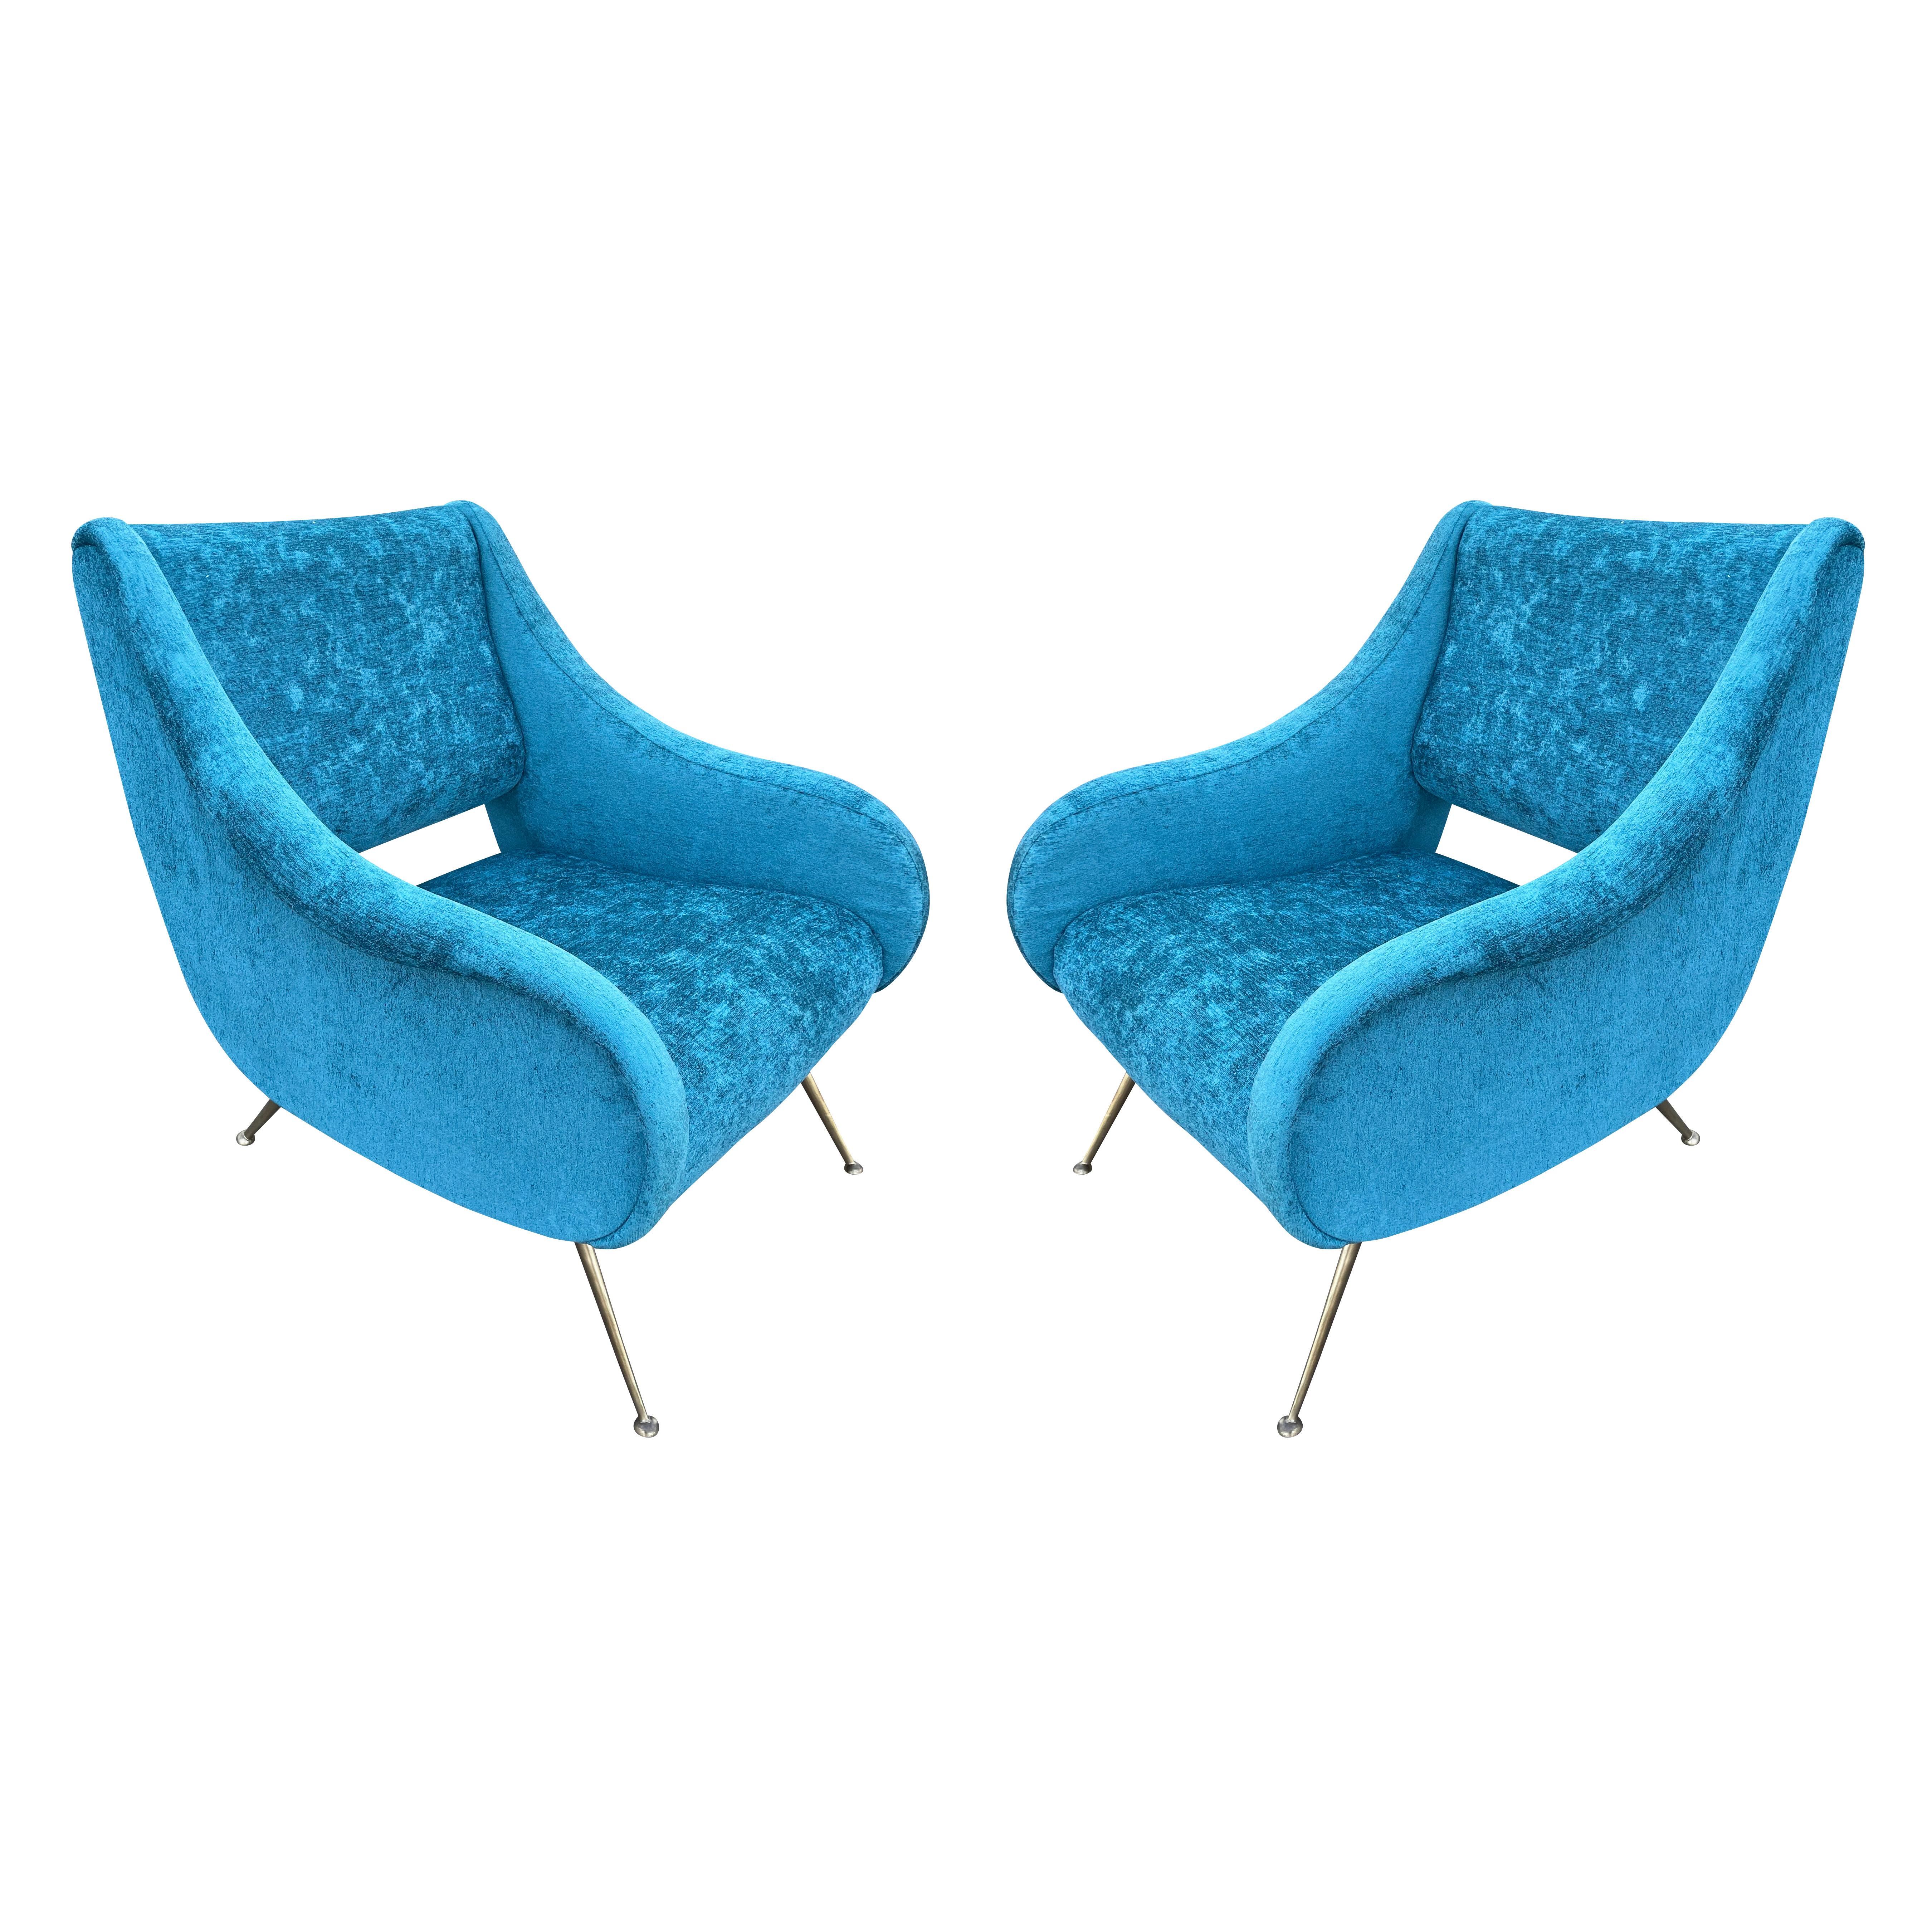 Italian midcentury armchairs in the style of Gio Ponti
$6,900.00
Chic Italian midcentury armchairs in the style of Gio Ponti with a slit back and tapering brass legs.

Recovered in a blue velvet. Price for the pair-sold individually on